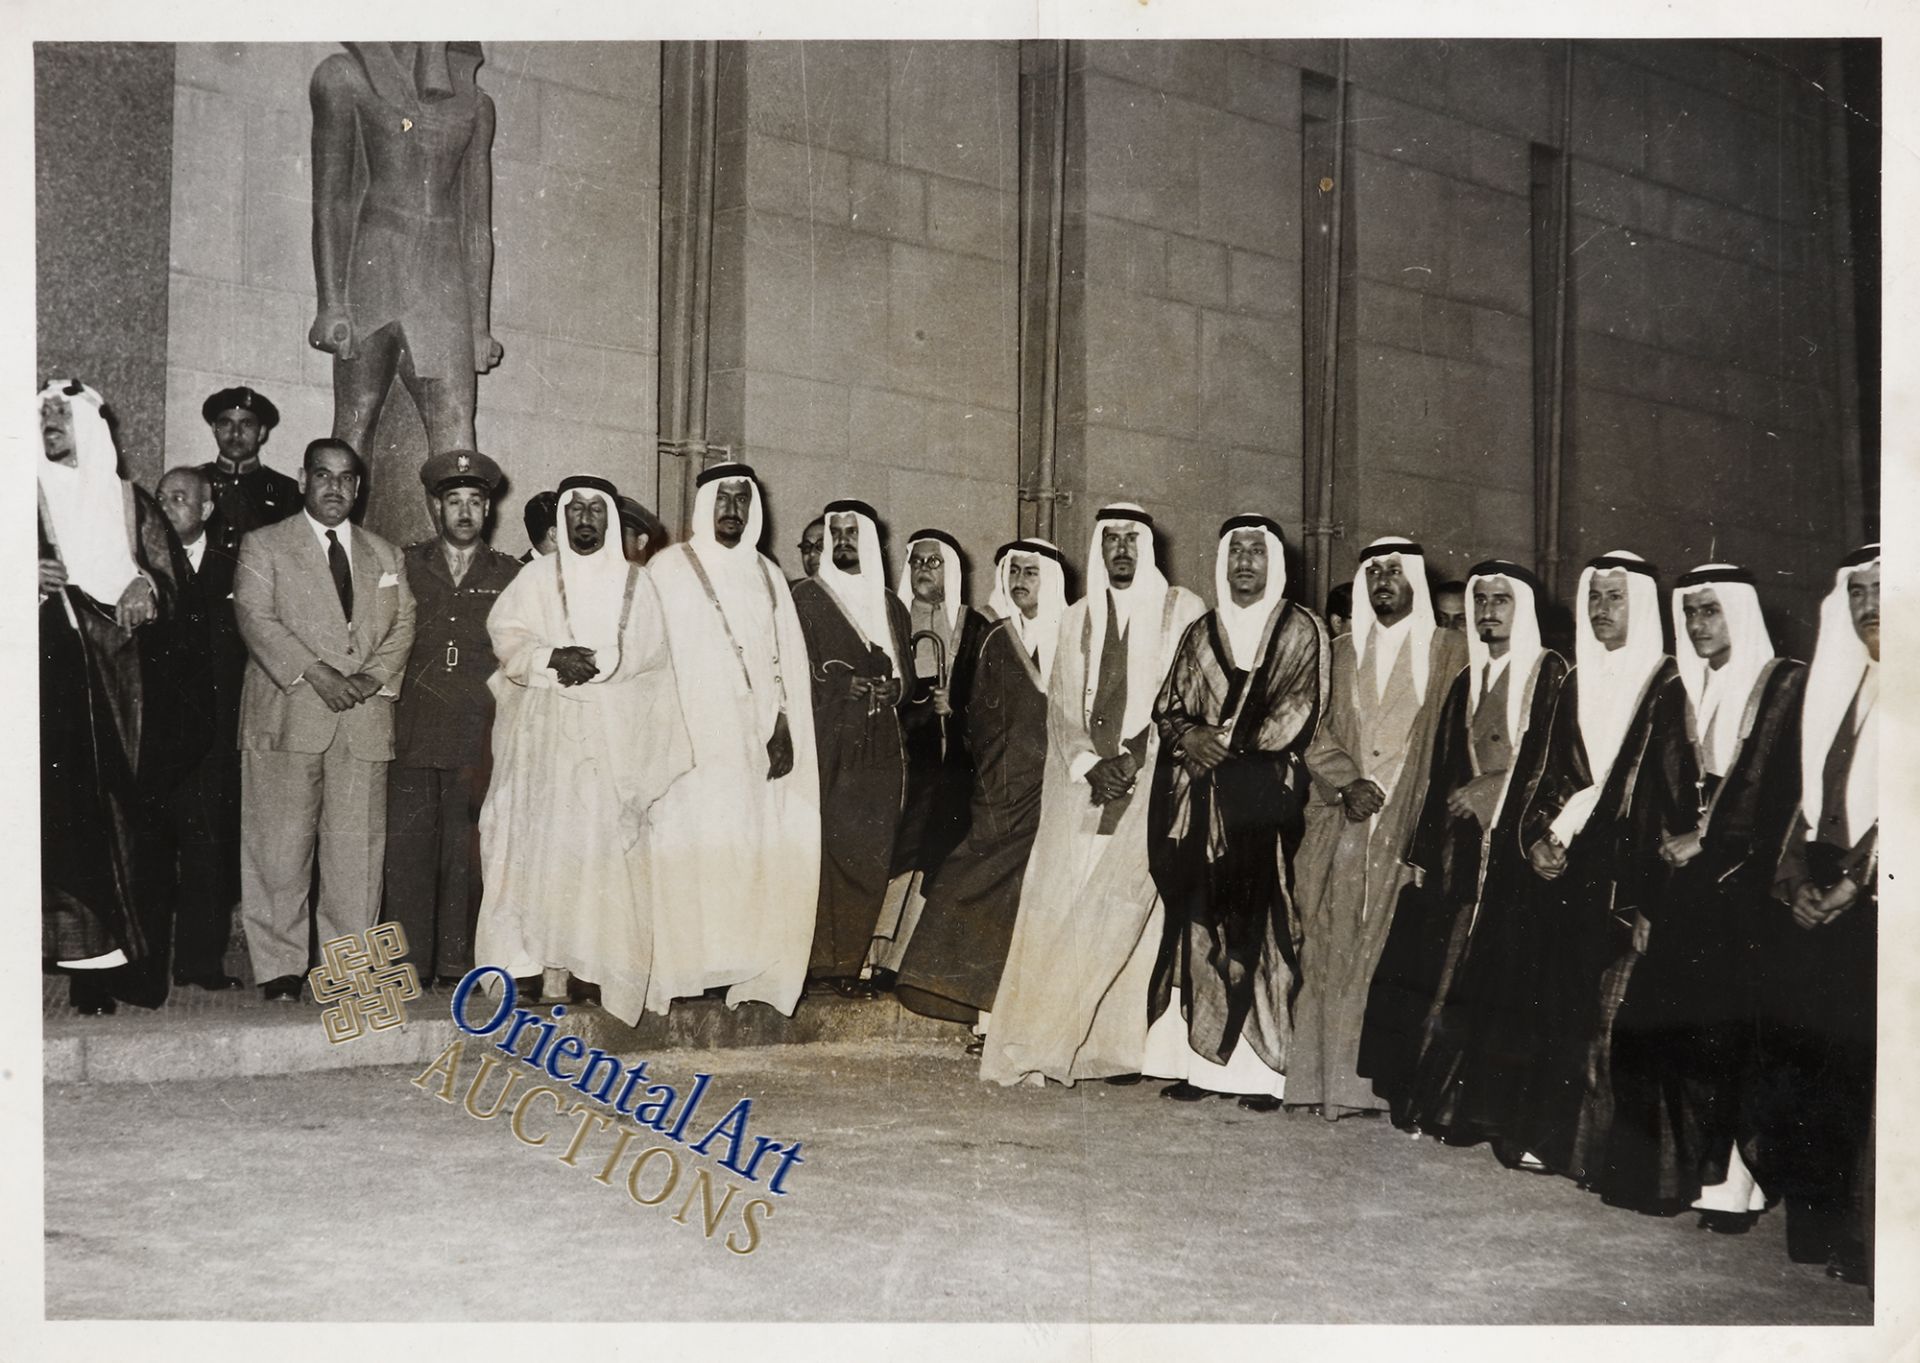 A RARE PHOTOGRAPH SHOWING KING ABDUL AZIZ’S SONS IN EYGPT